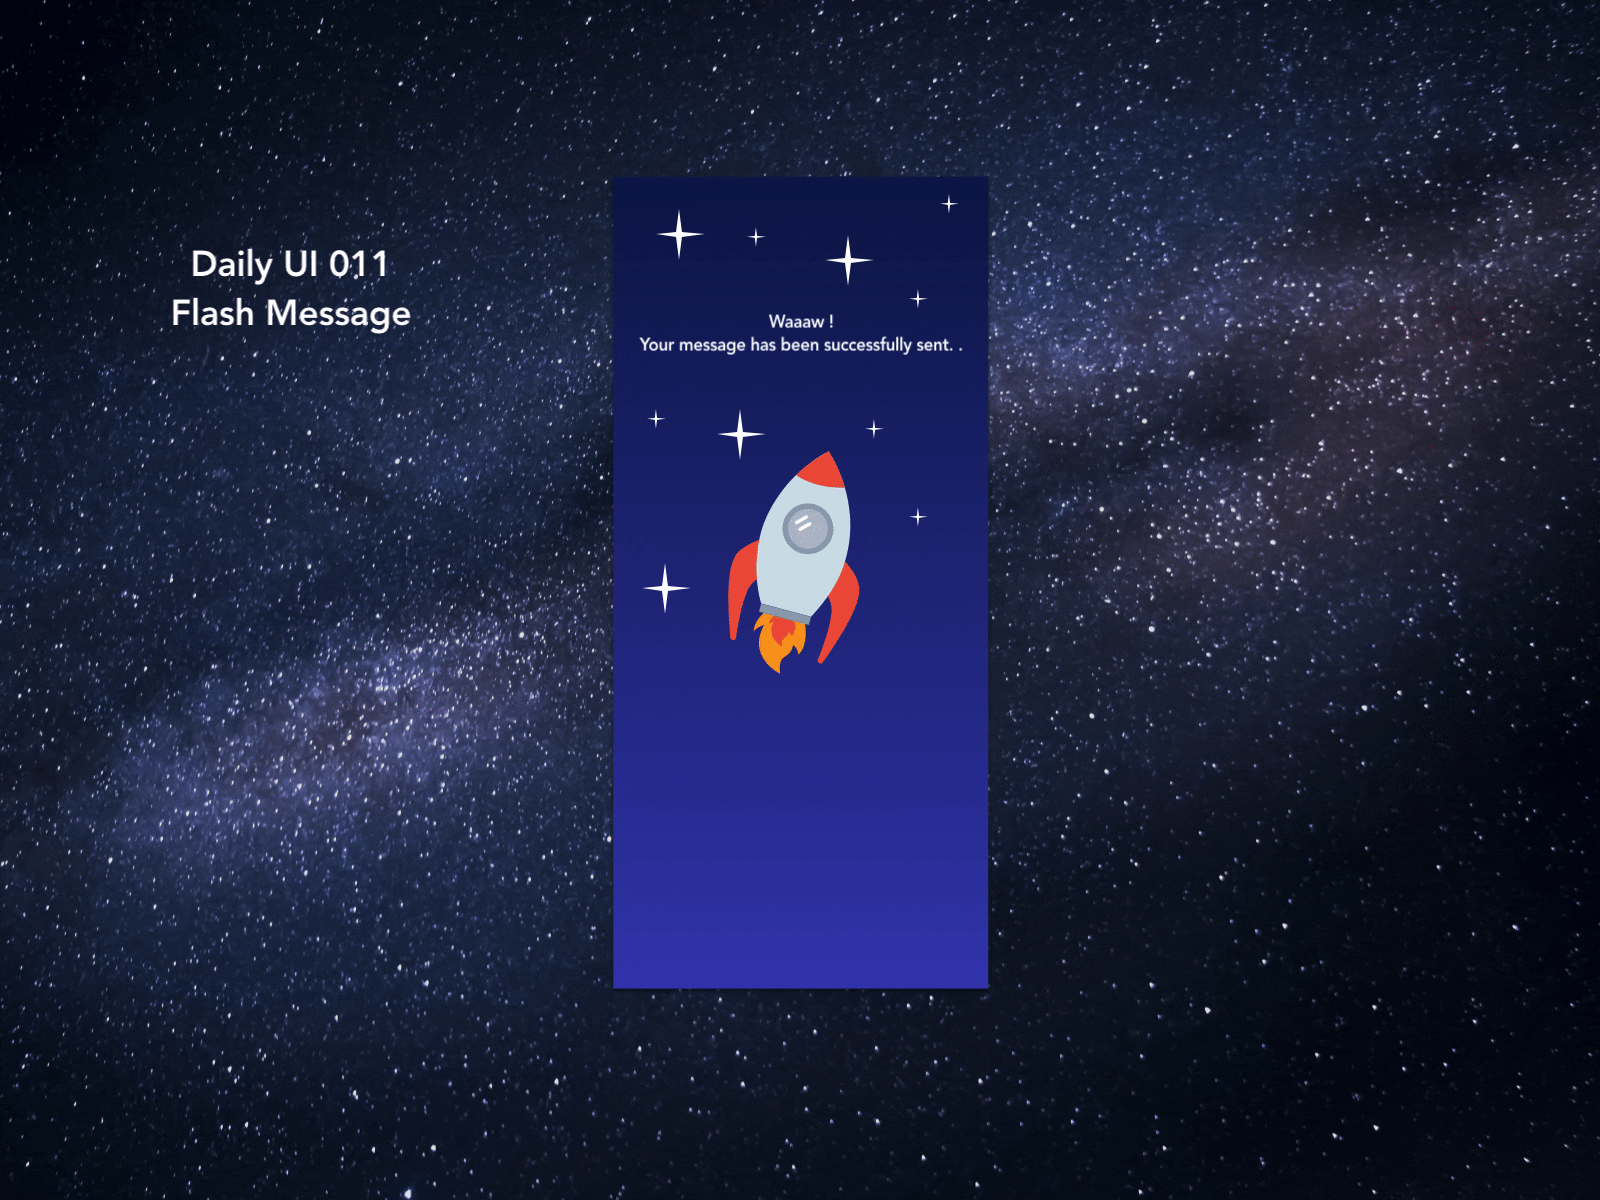 Daily UI 011 - Flash message